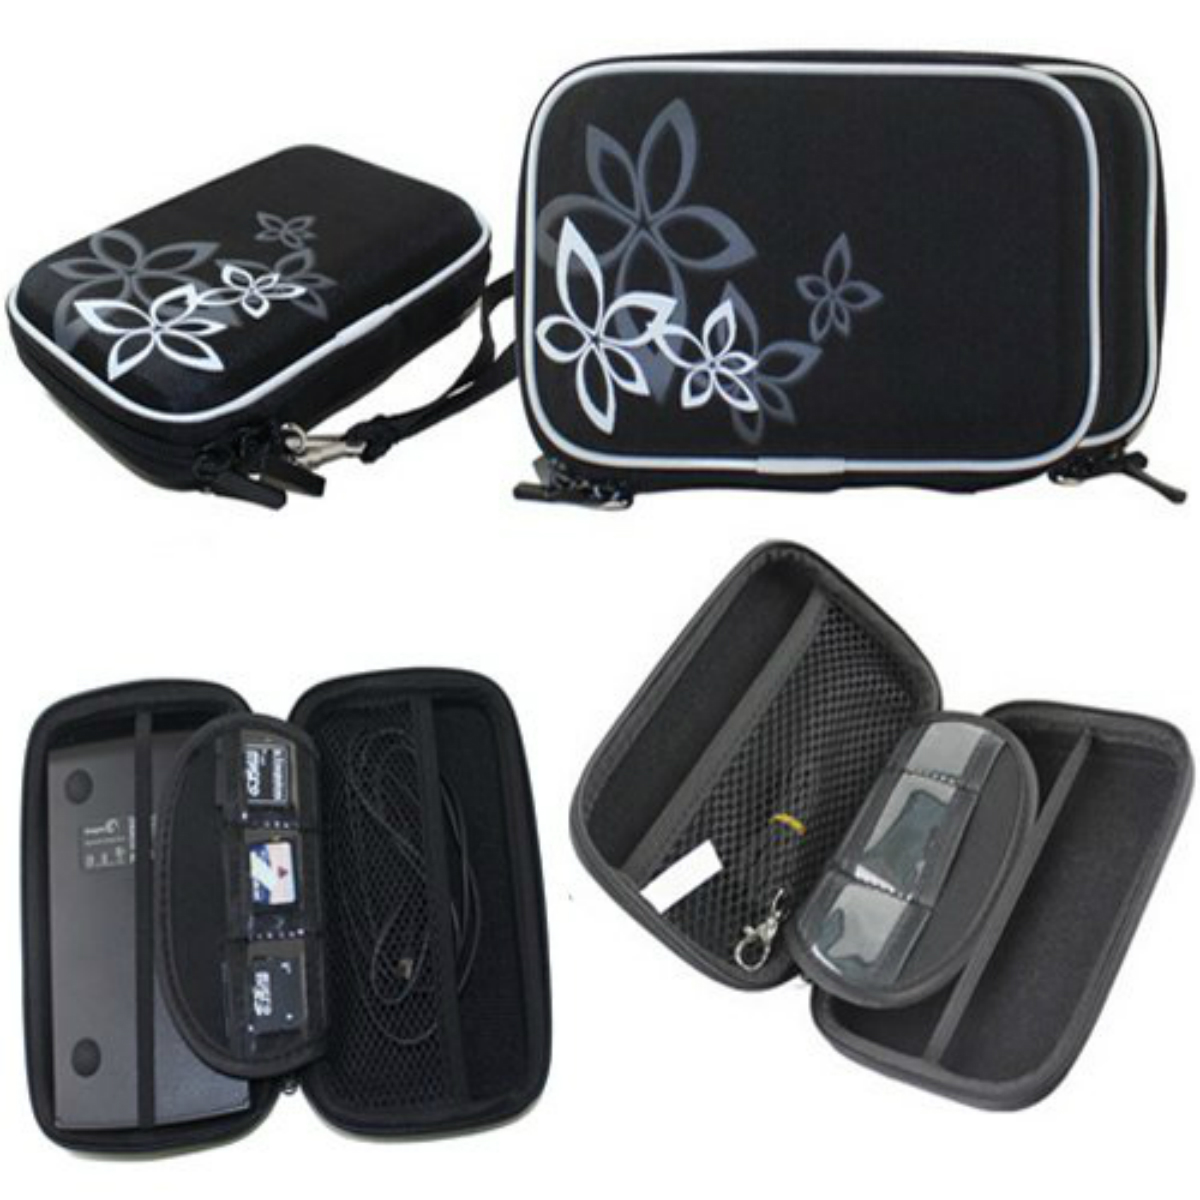 Portable-External-Hard-Drive-Disk-Pouch-Bag-HDD-Carry-Cover-USB-Cable-Storage-Case-Organizer-Bag-for-1633386-9